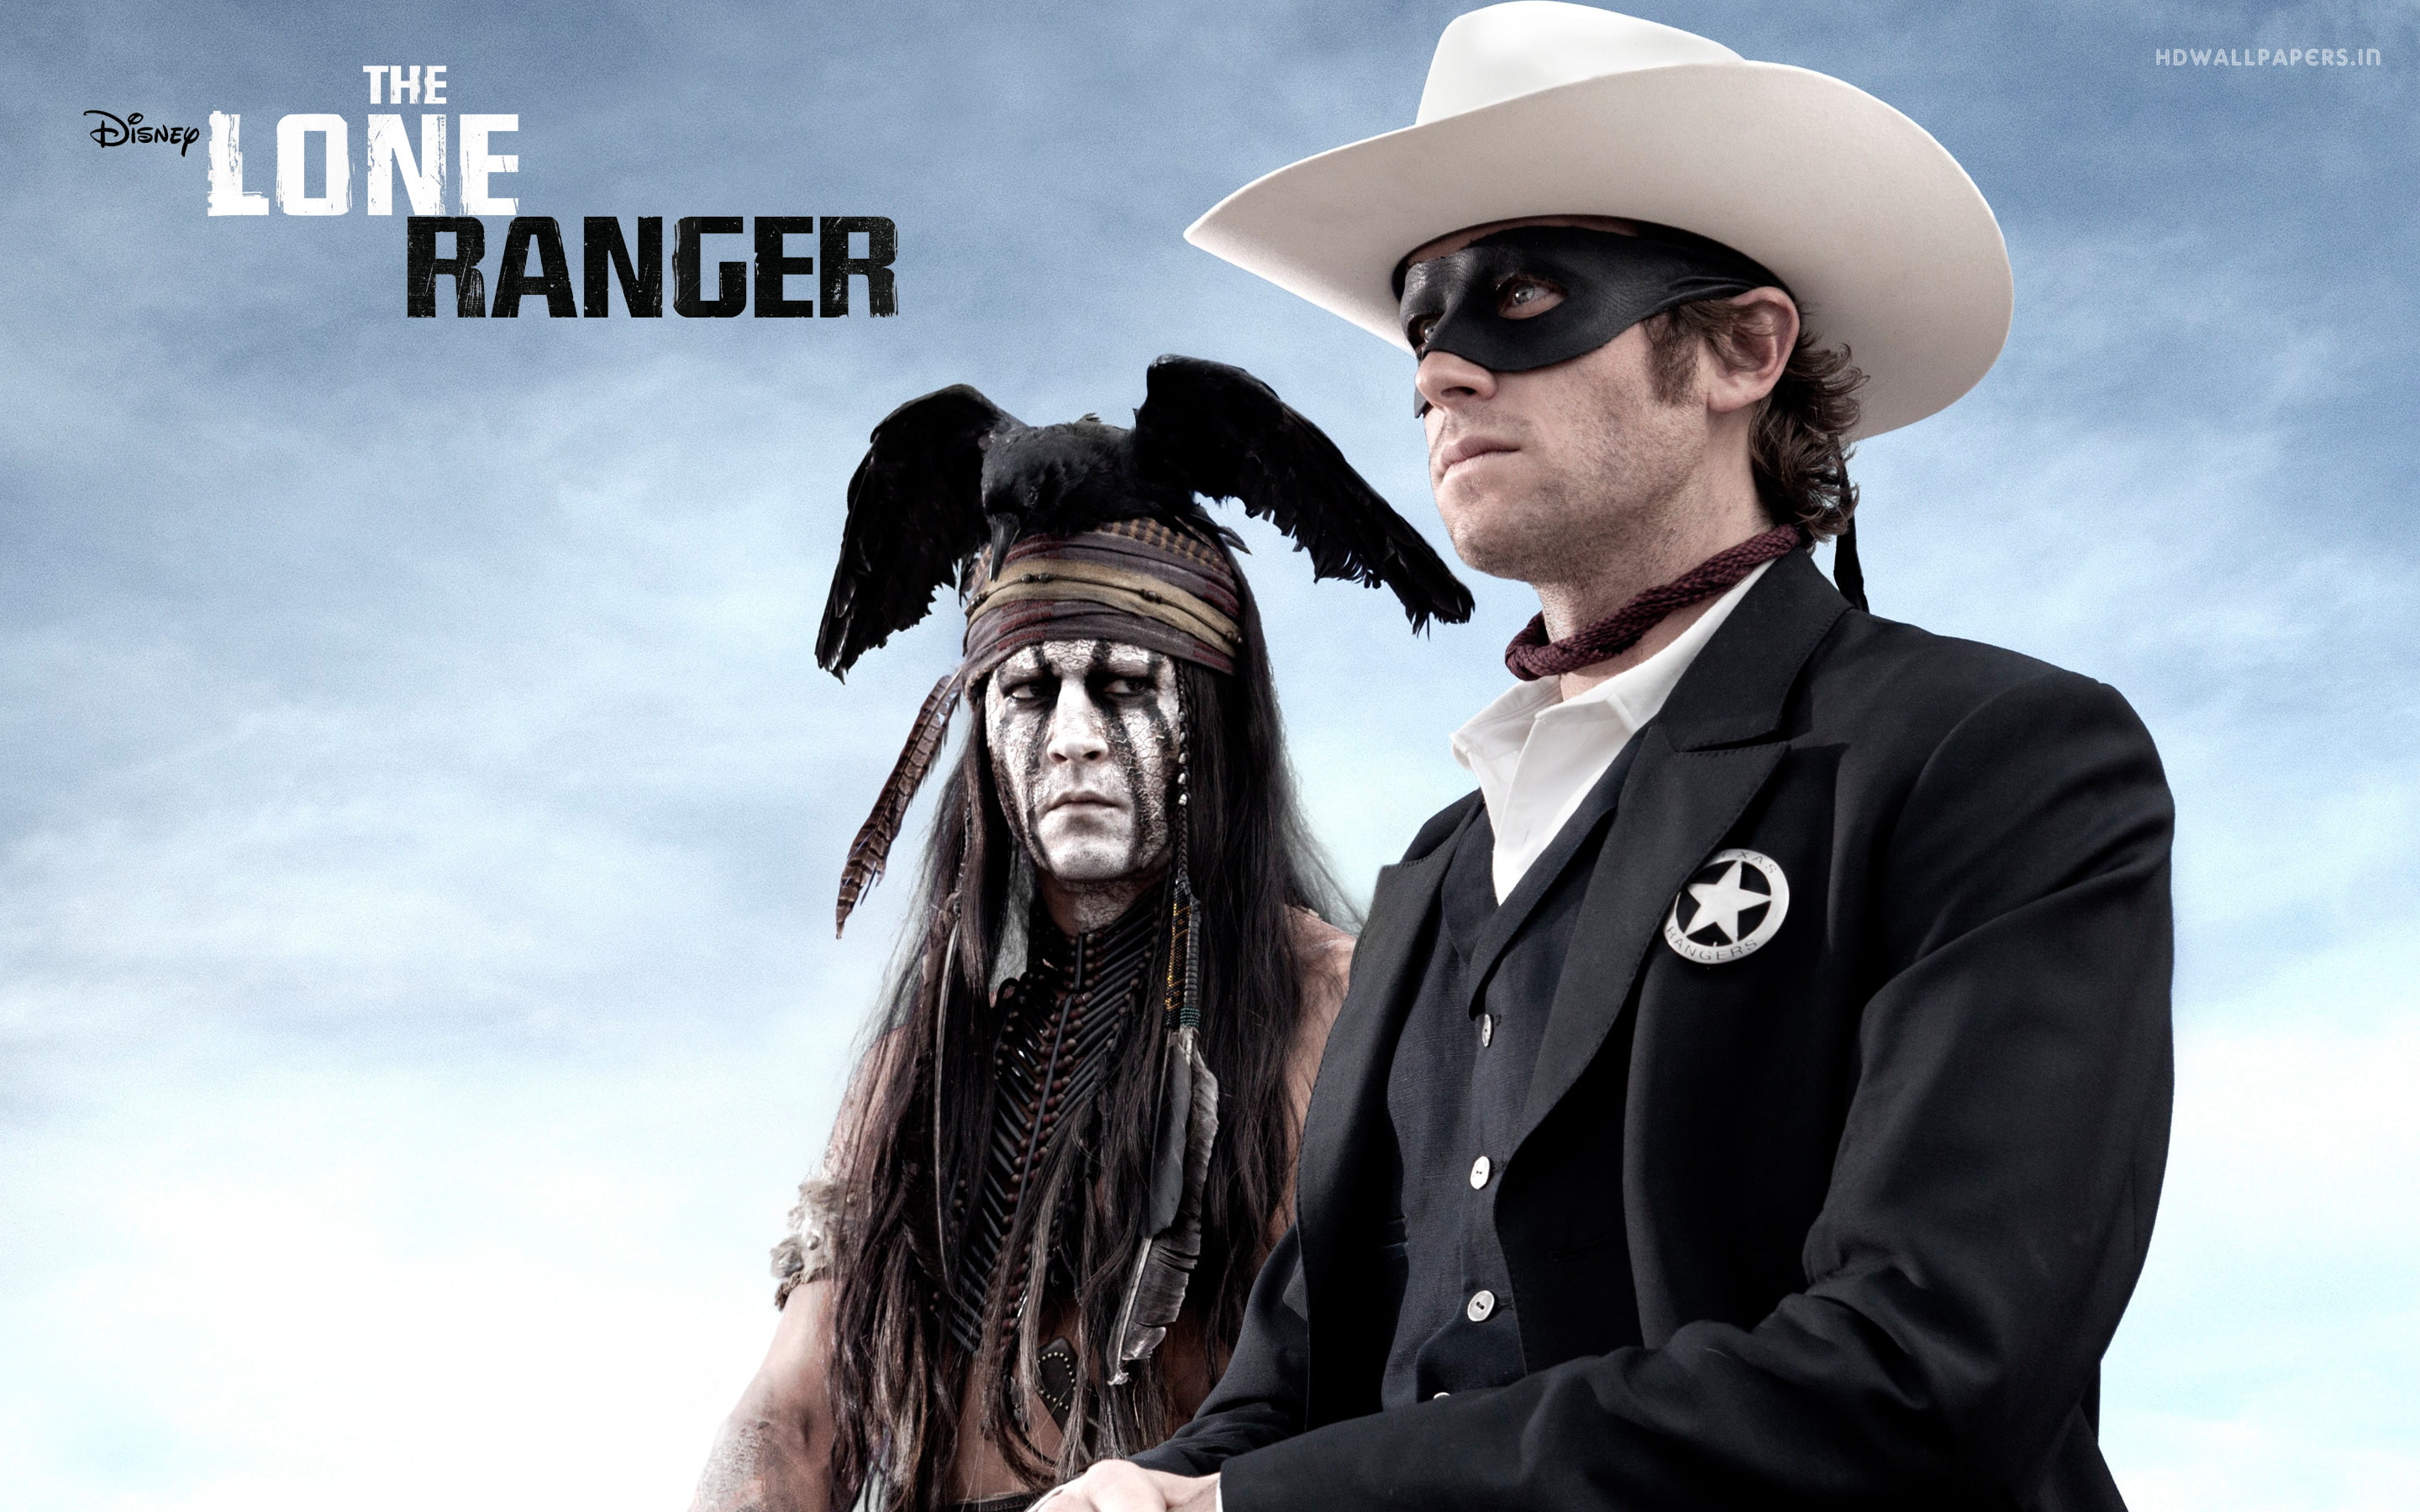 The Lone Ranger Movie, clothing, sky, men, people, portrait, text